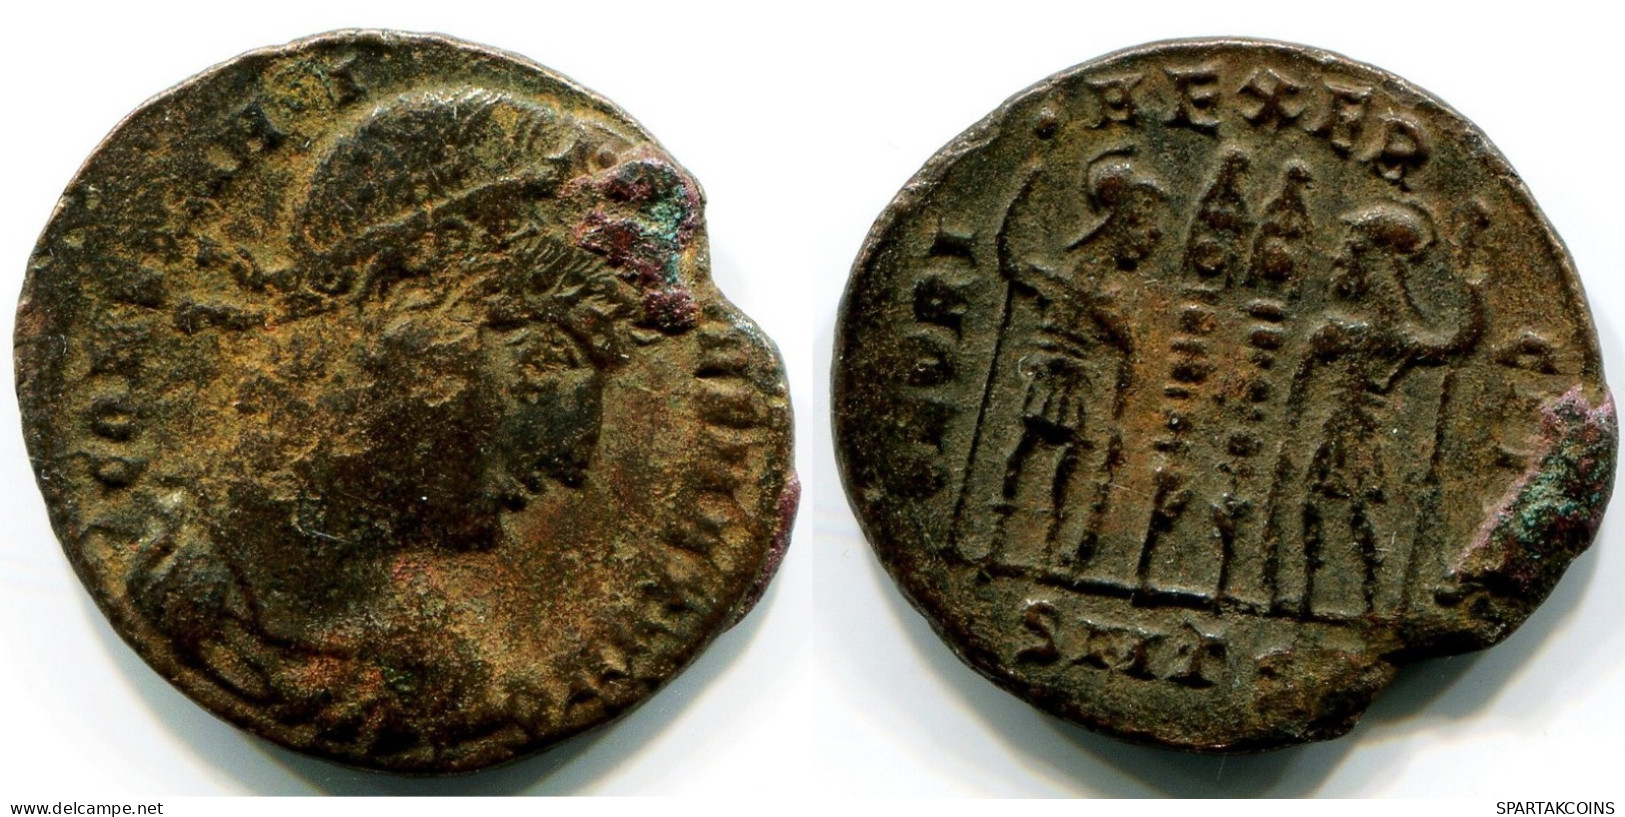 CONSTANTINE I MINTED IN THESSALONICA FOUND IN IHNASYAH HOARD #ANC11130.14.D.A - El Imperio Christiano (307 / 363)